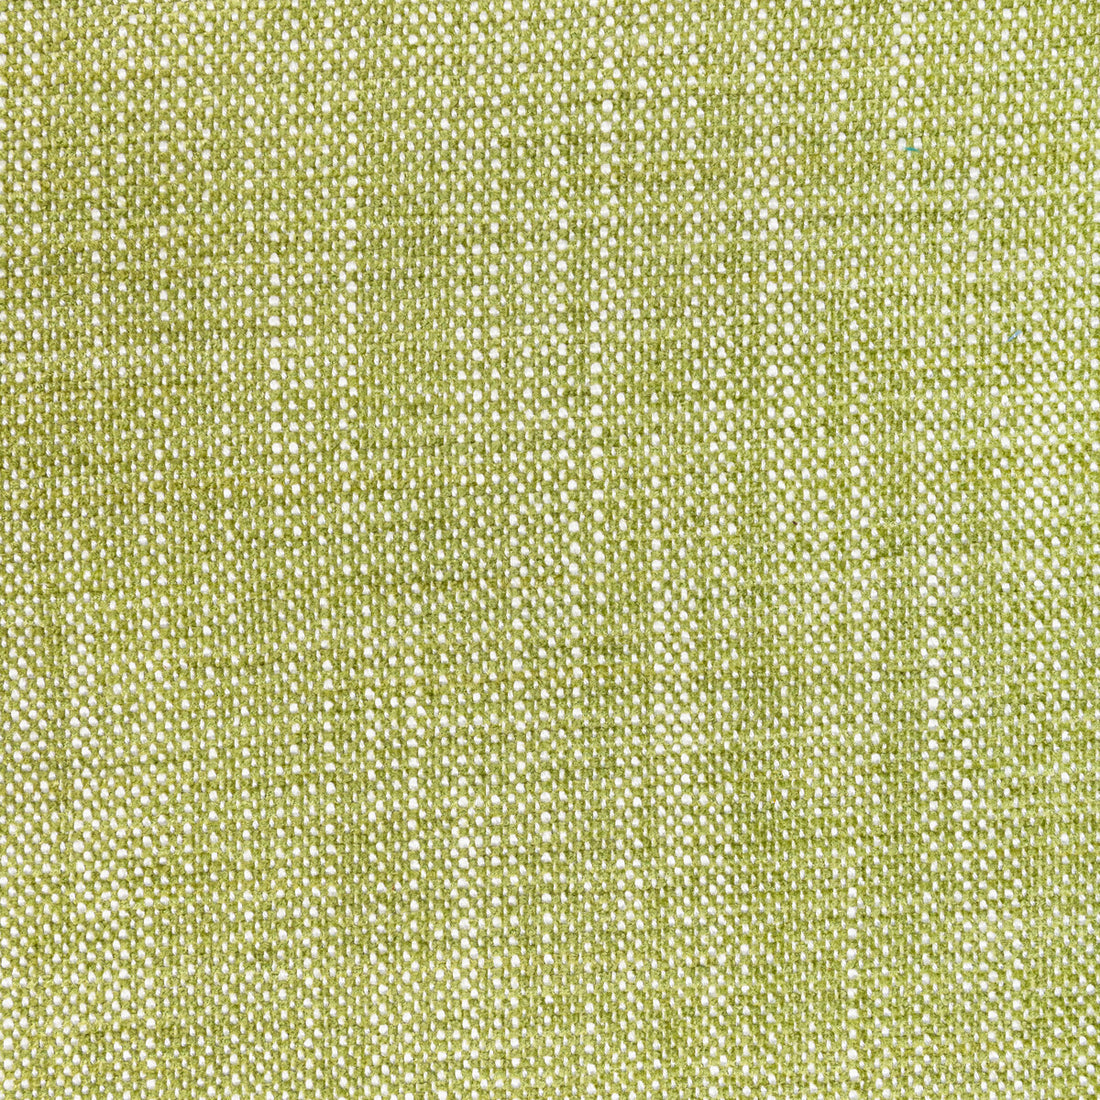 Kravet Design fabric in 36408-123 color - pattern 36408.123.0 - by Kravet Design in the Performance Crypton Home collection